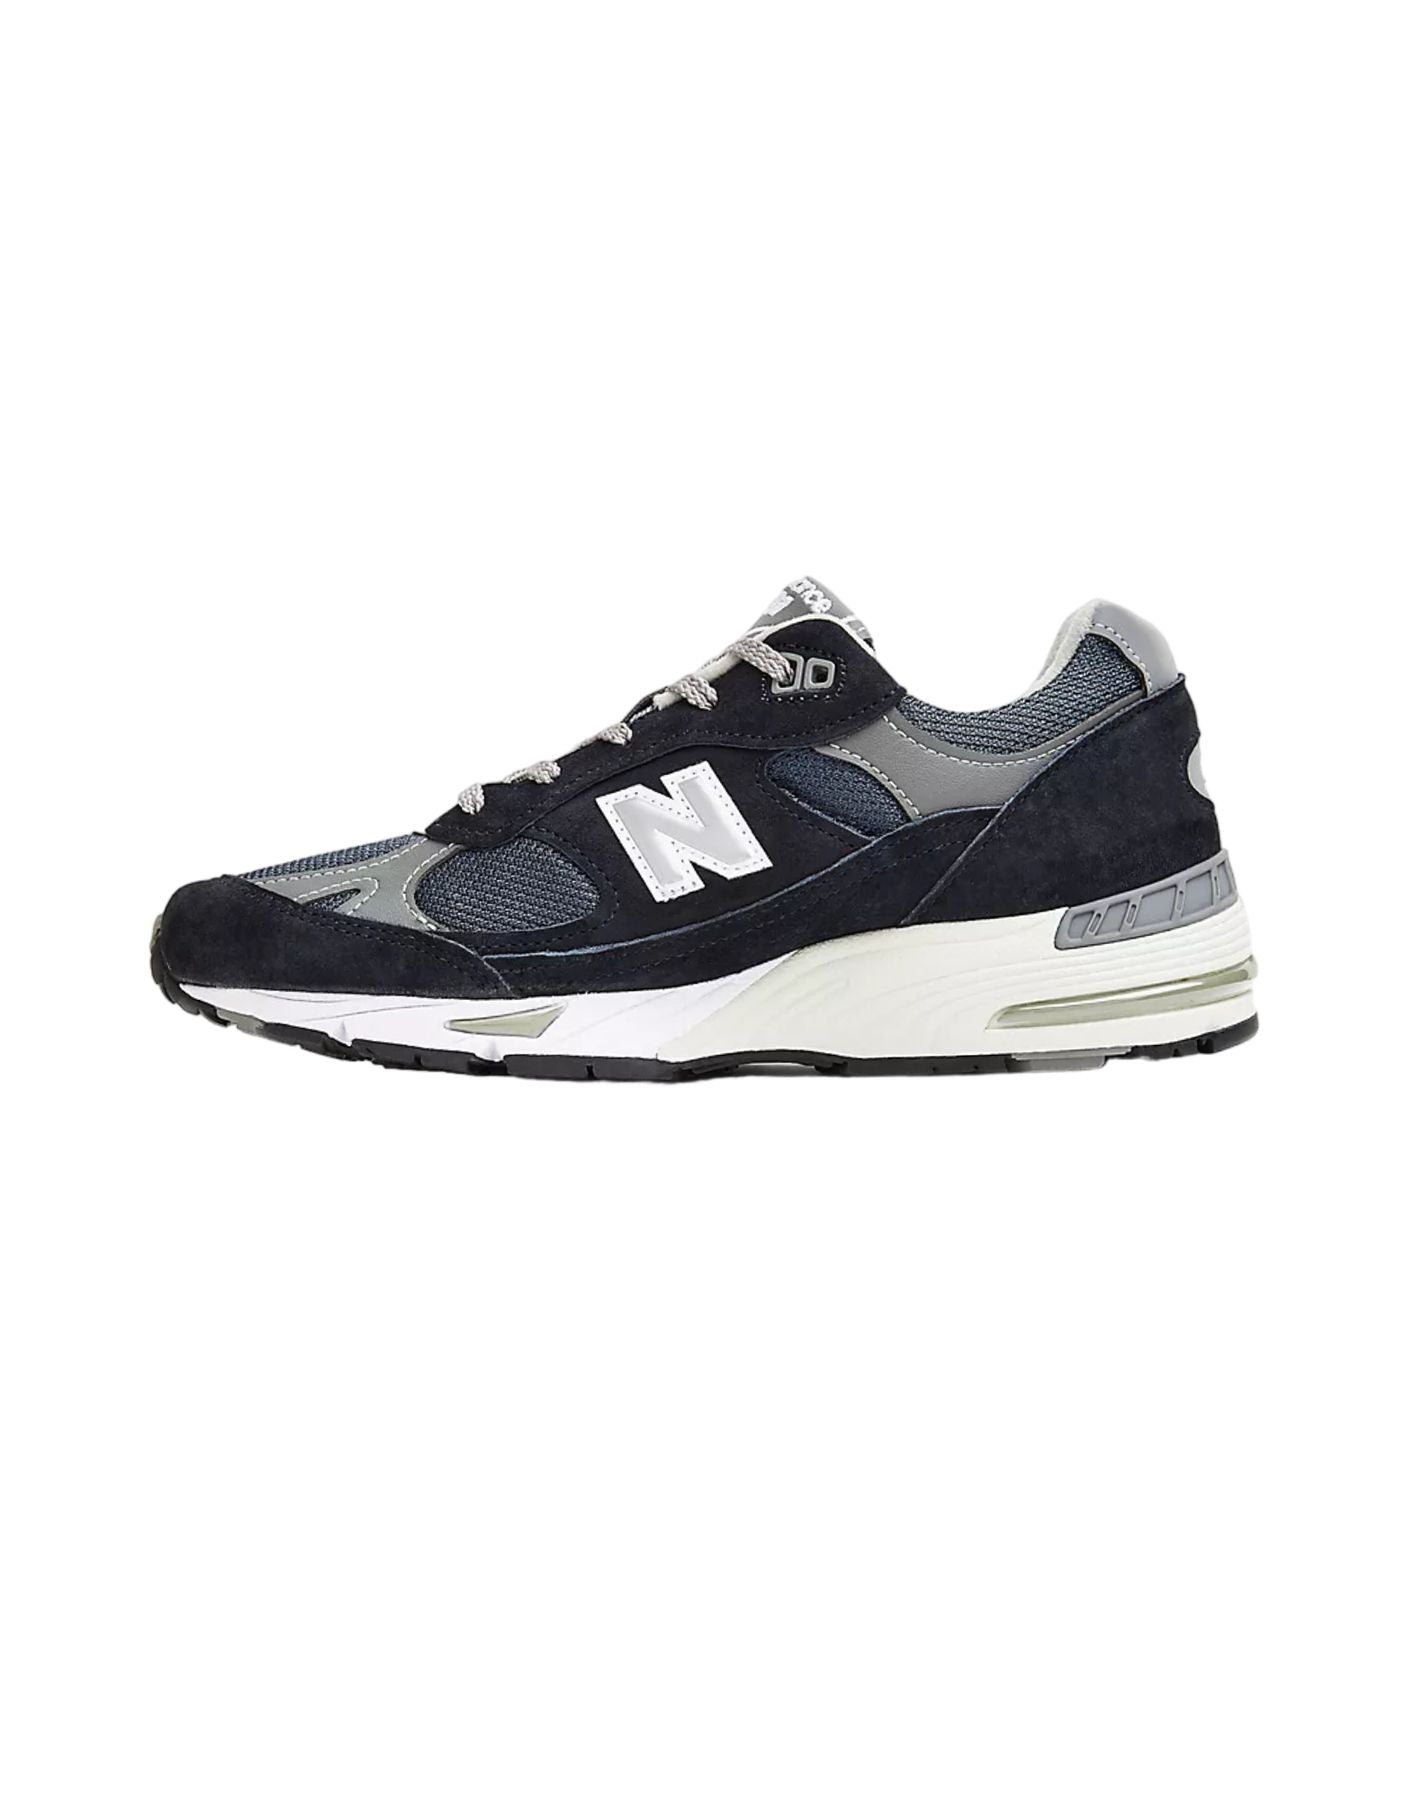 Shoes for woman W991NV NEW BALANCE